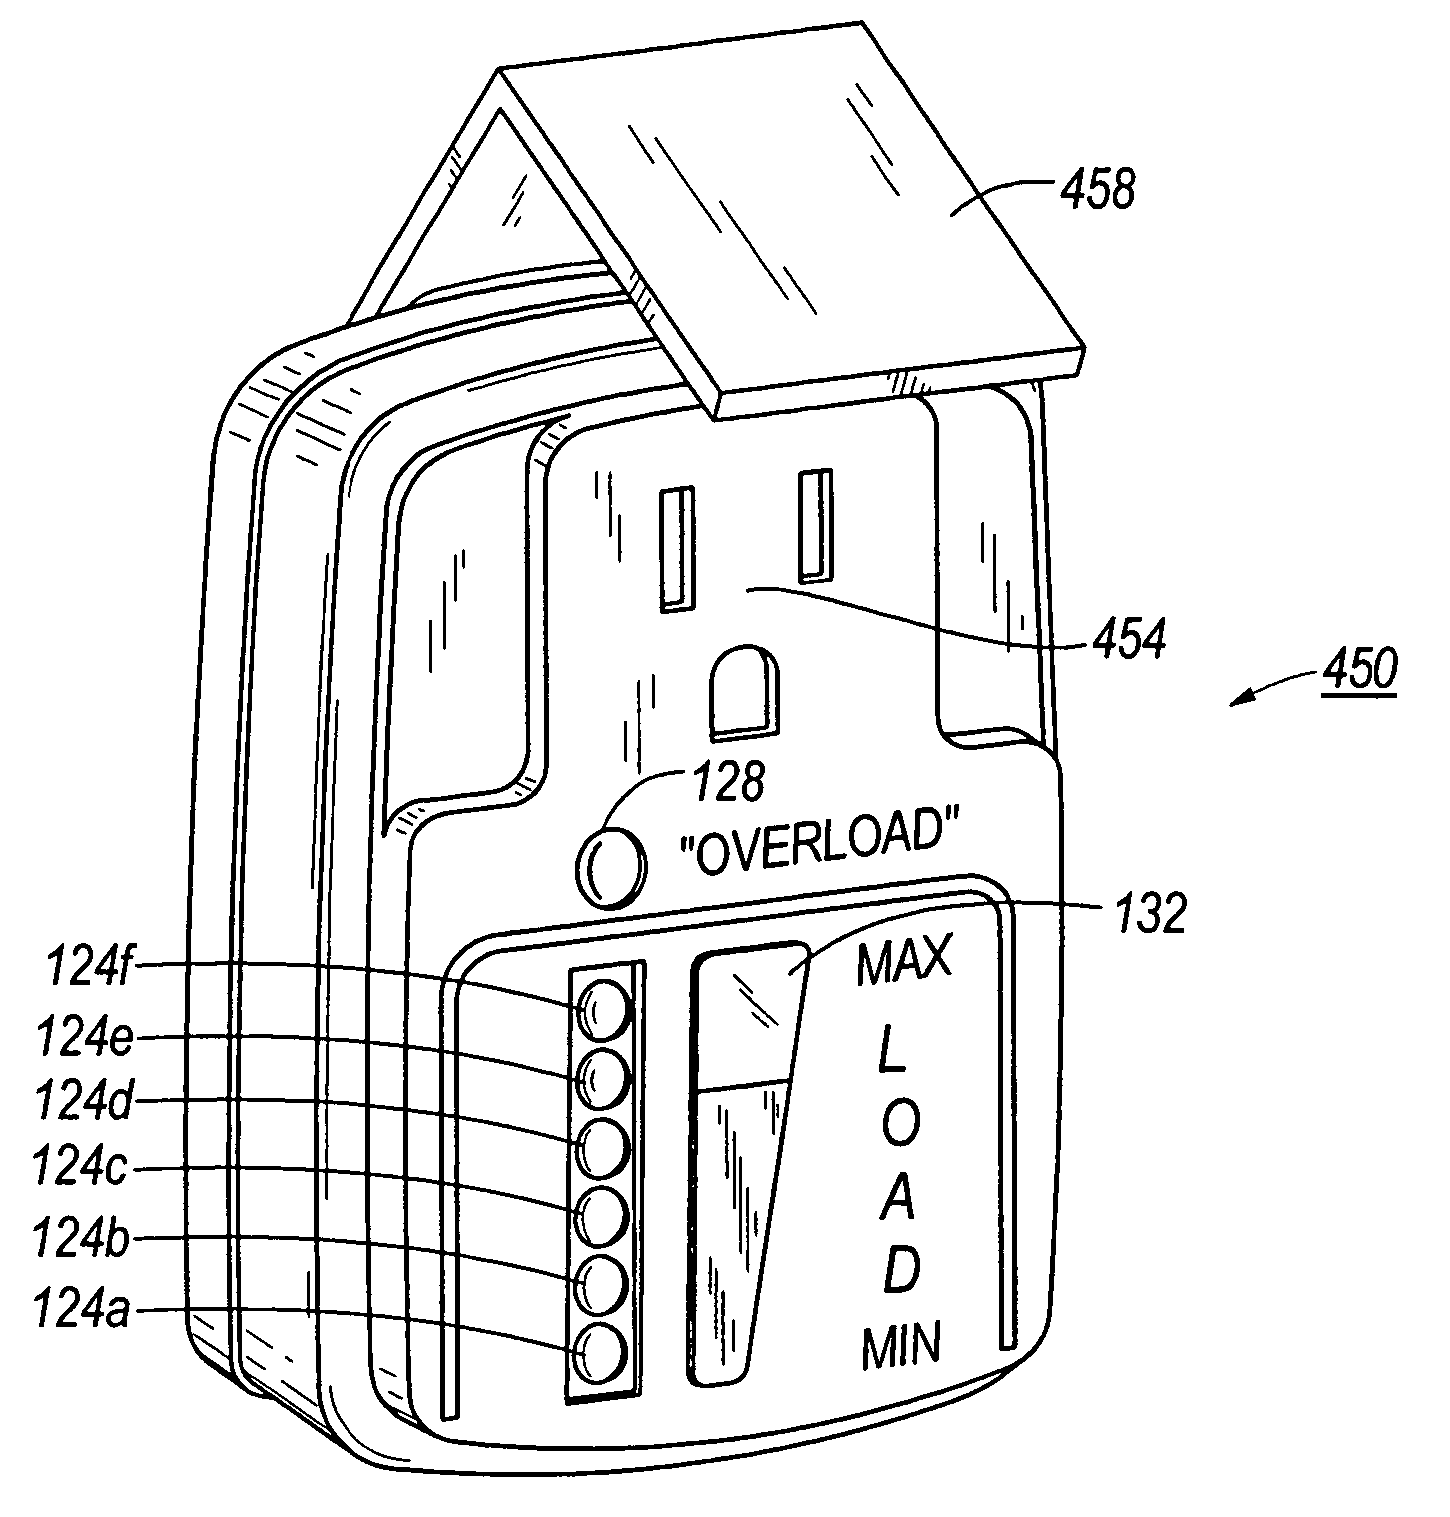 Monitoring system for a generator